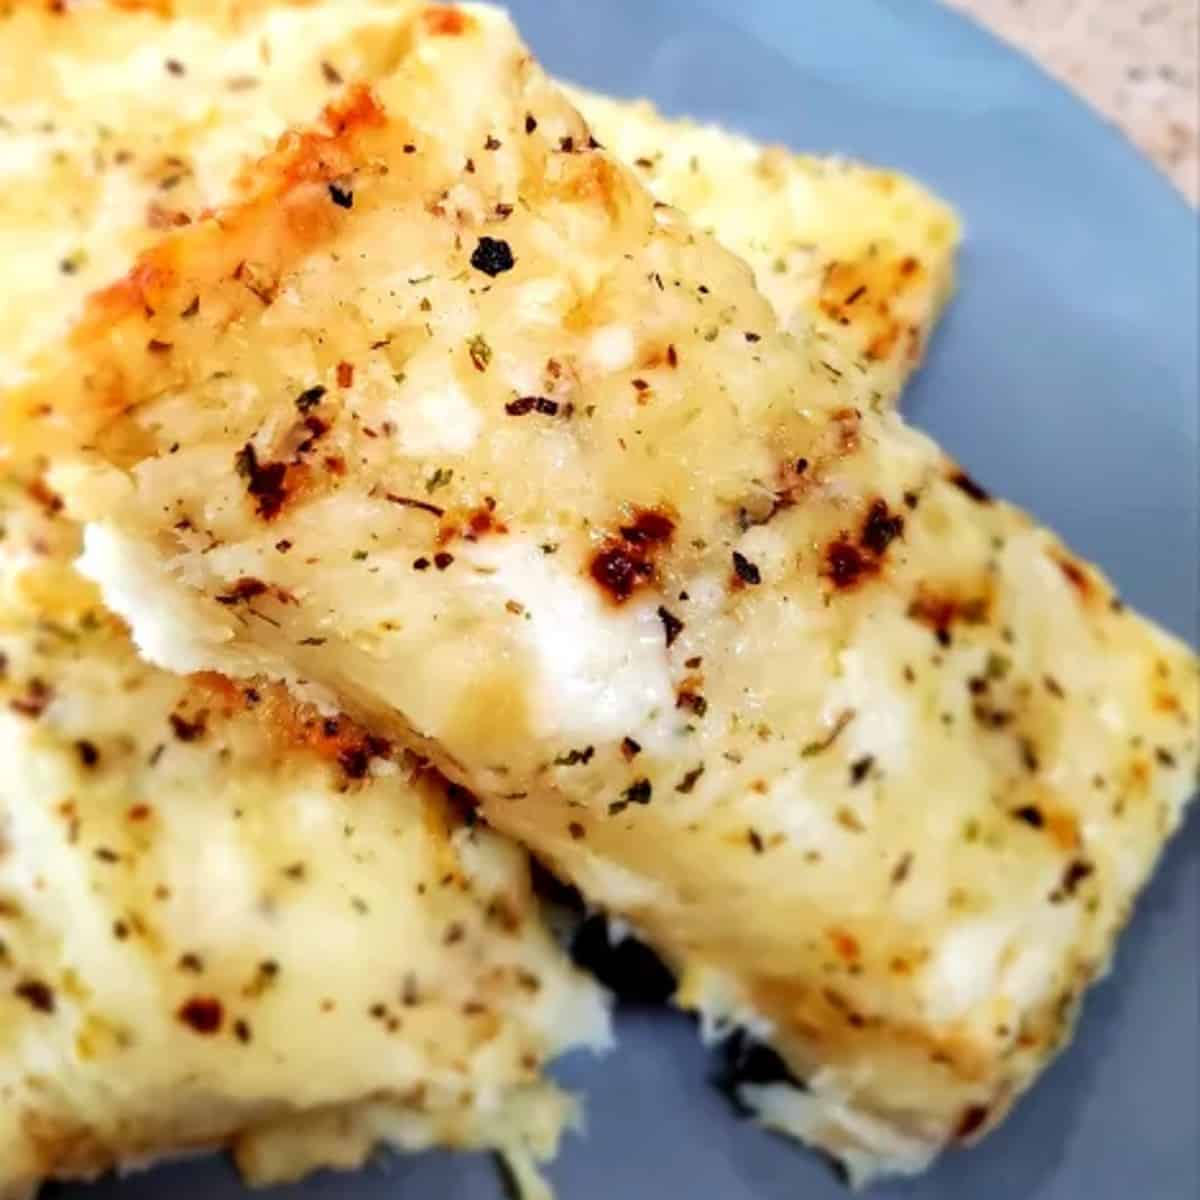 A close-up photo of a rectangular piece of golden brown Italian cheese bread on a blue plate. The bread is cut into squares, revealing melted mozzarella cheese and flecks of herbs in the center. A light dusting of parmesan cheese adorns the top